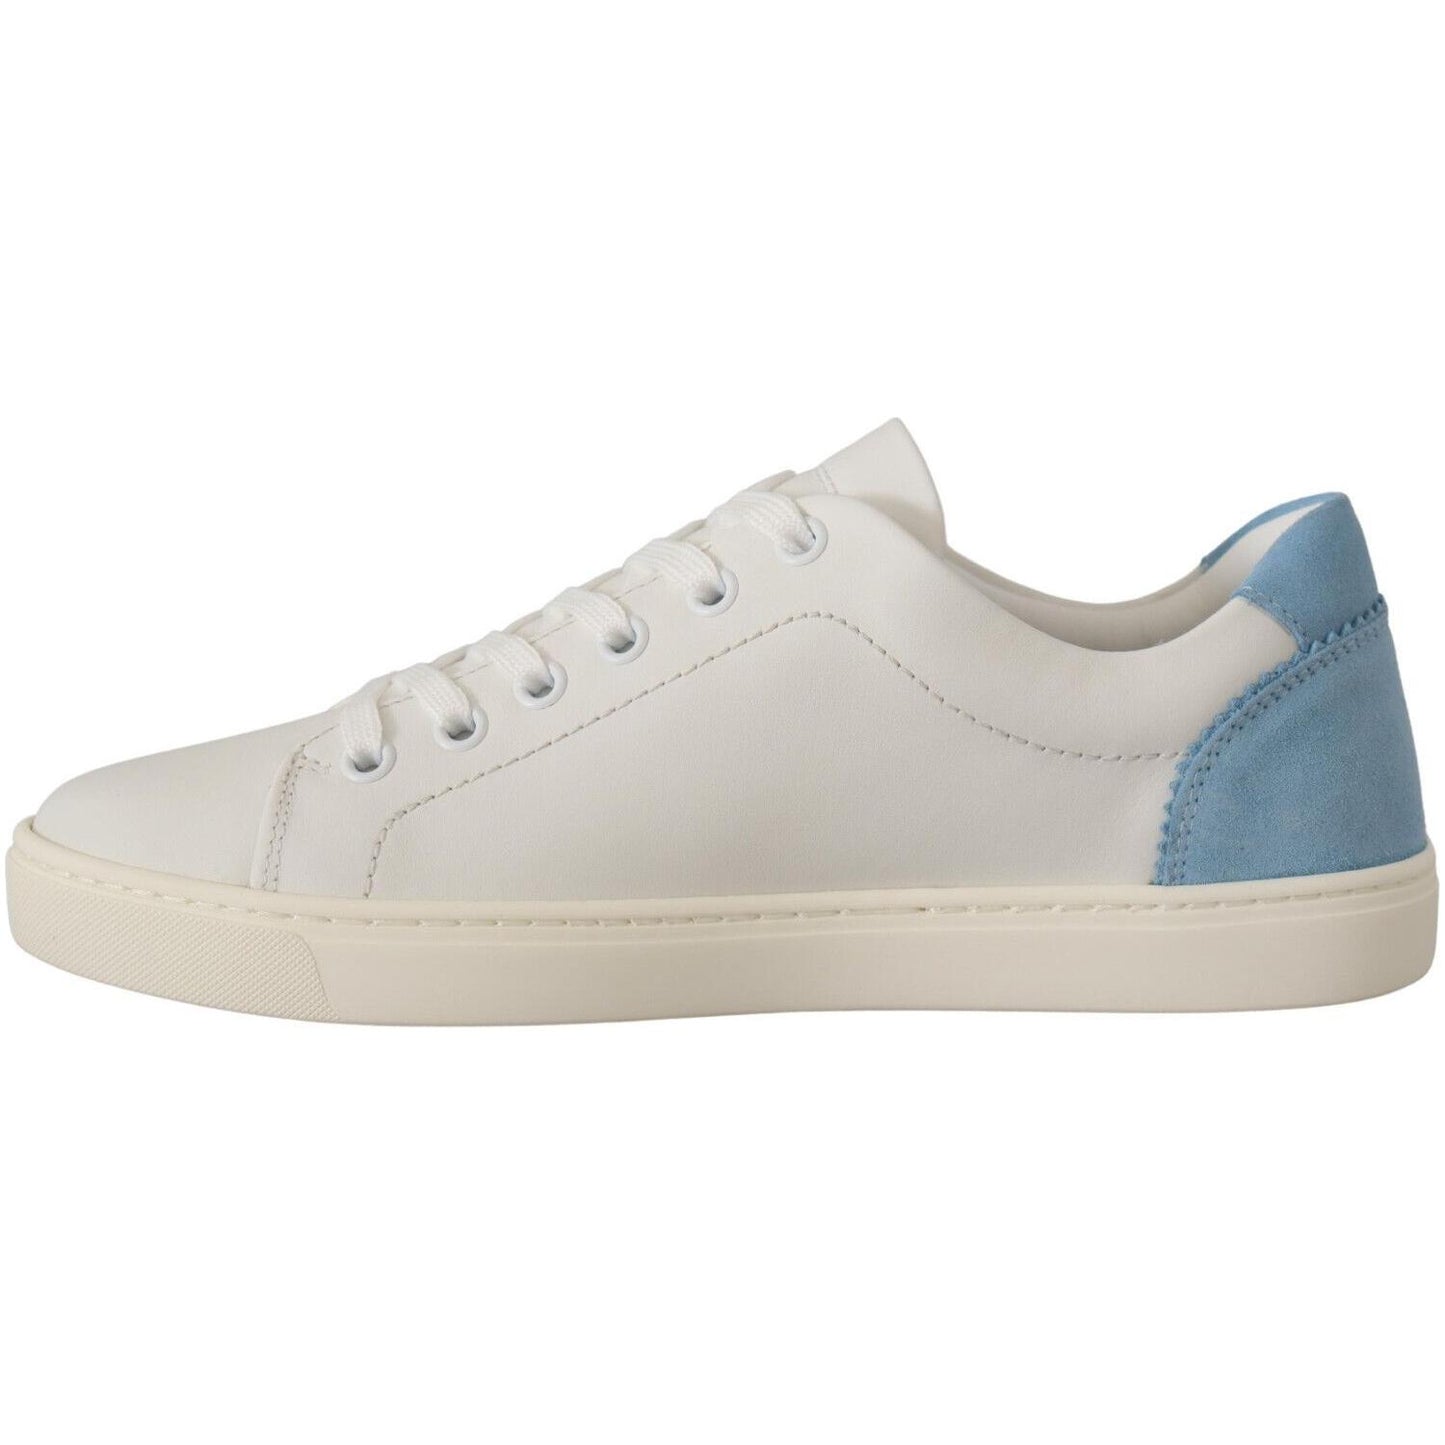 Dolce & Gabbana Exquisite Italian Leather Low-Top Sneakers white-blue-leather-low-top-sneakers-shoes